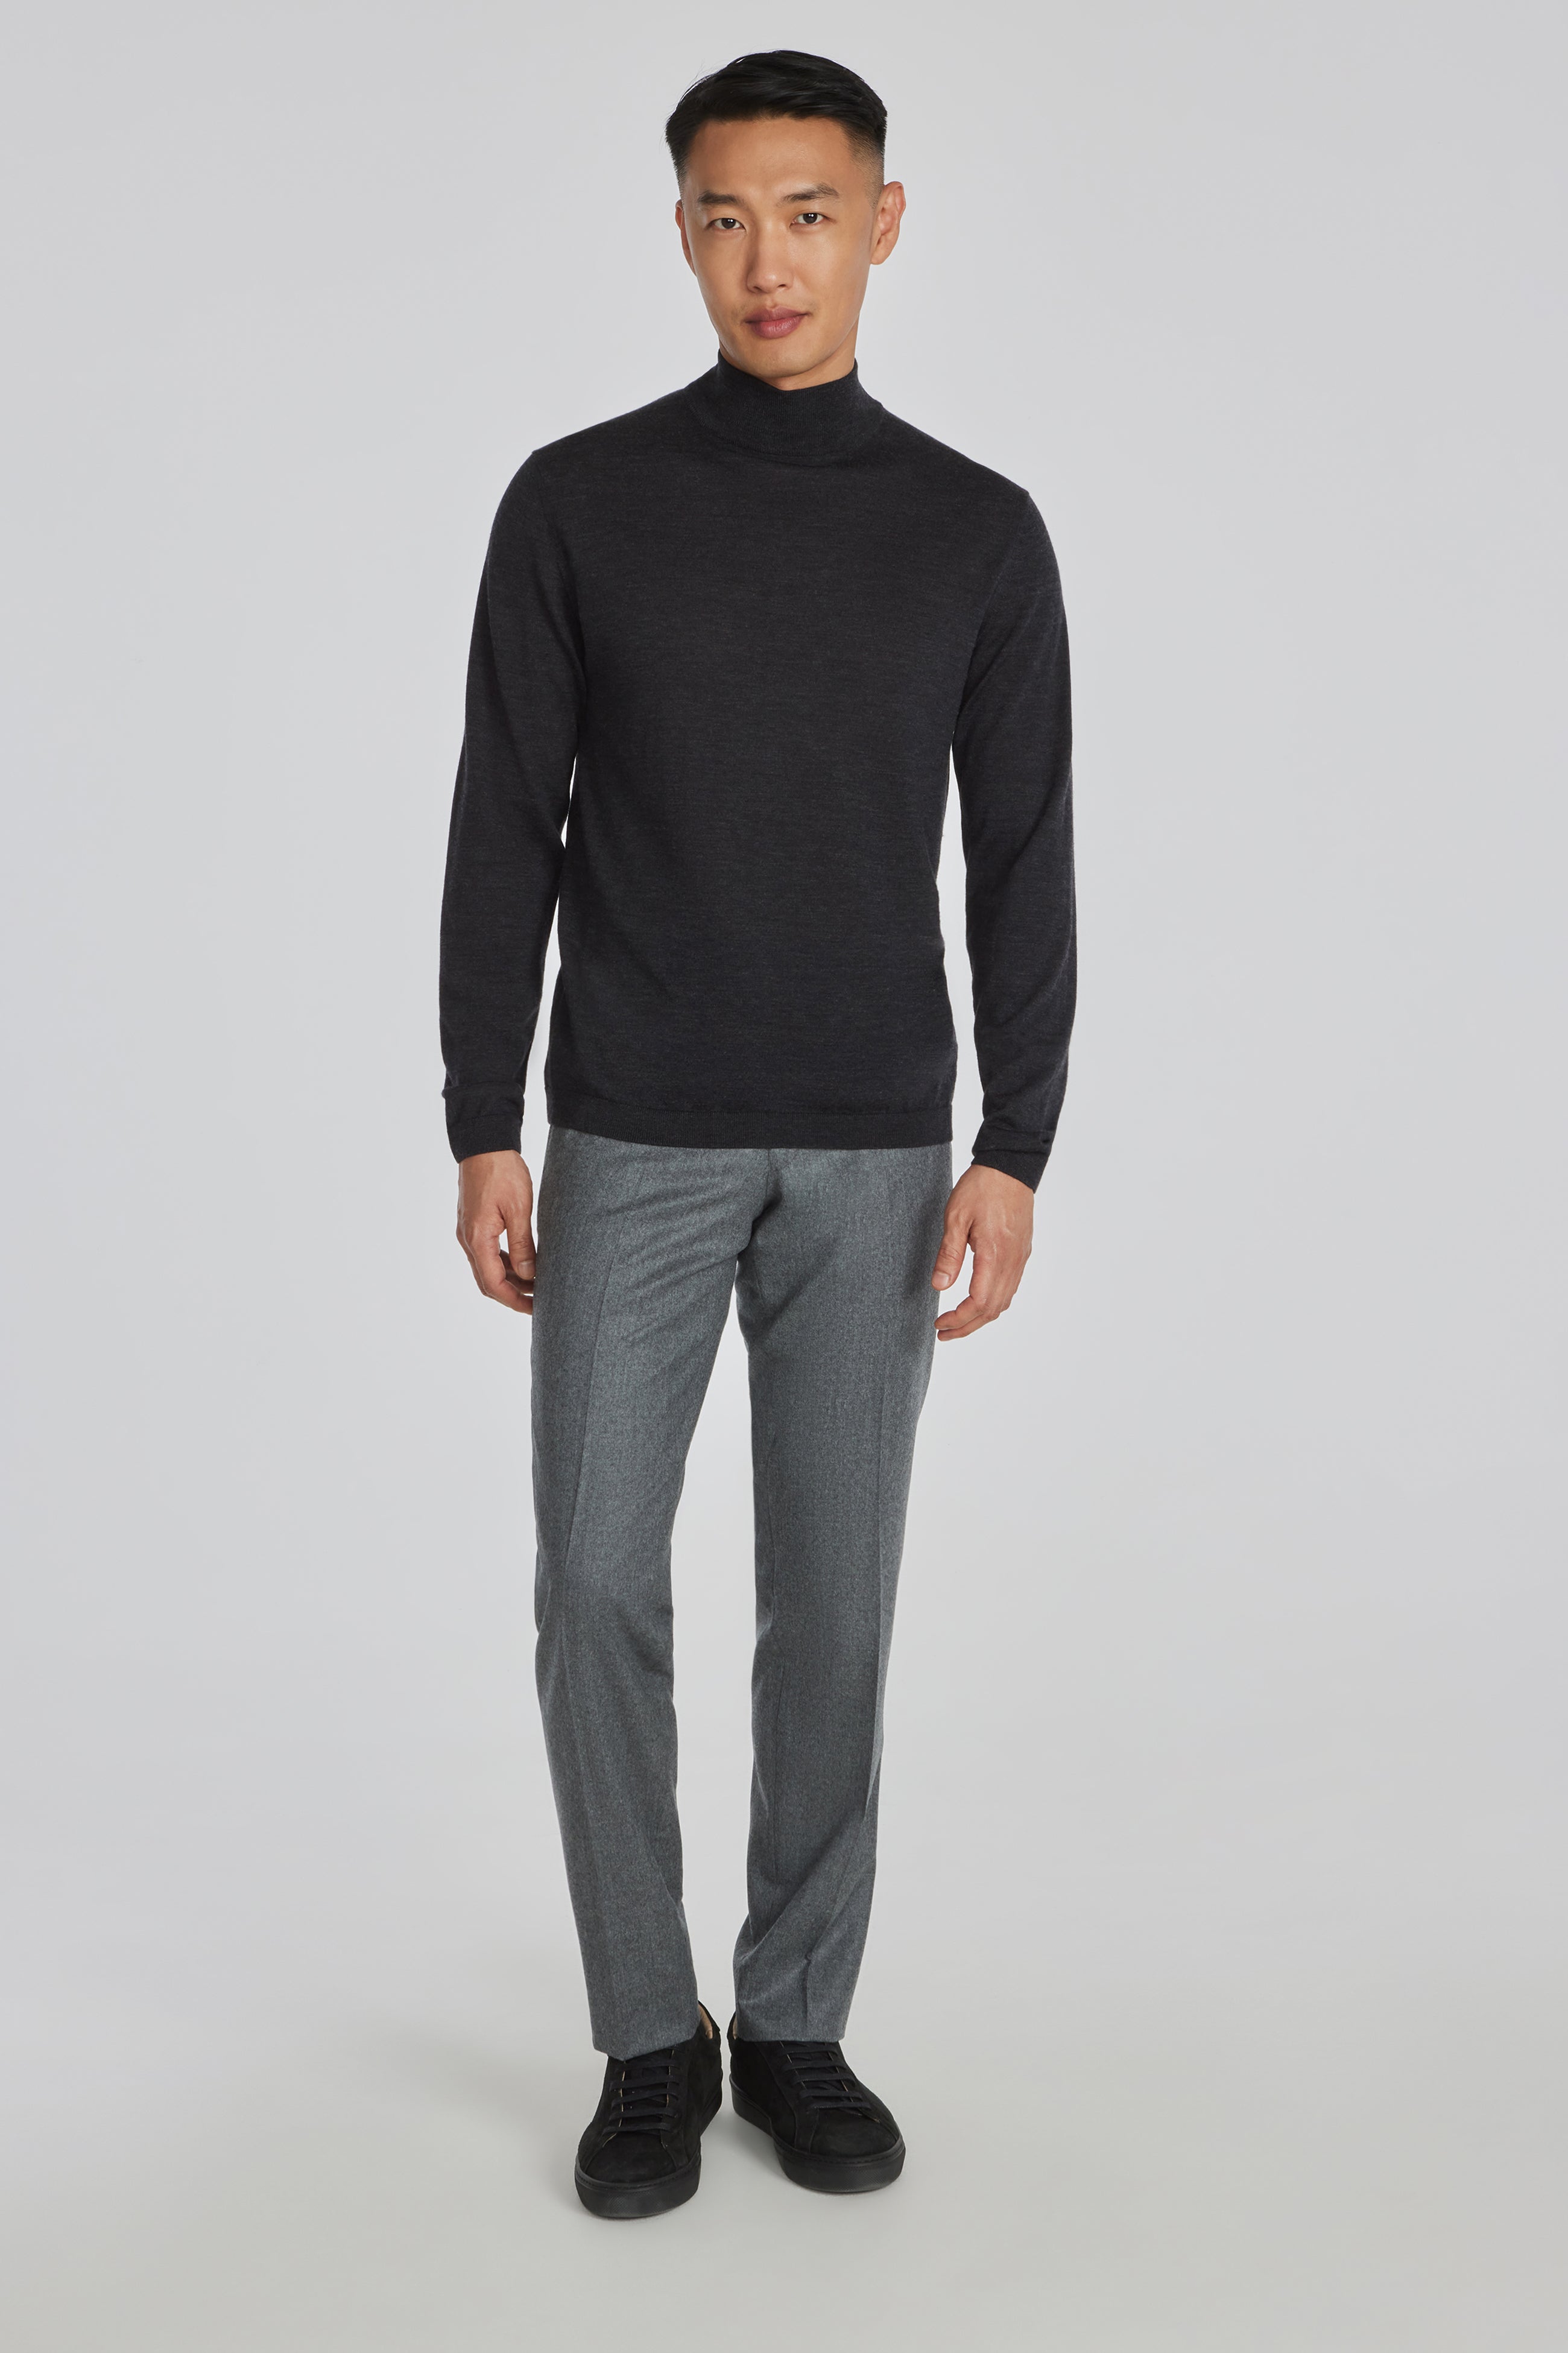 Alt view 2 Beaudry Wool, Silk and Cashmere Mock Neck Sweater in Charcoal